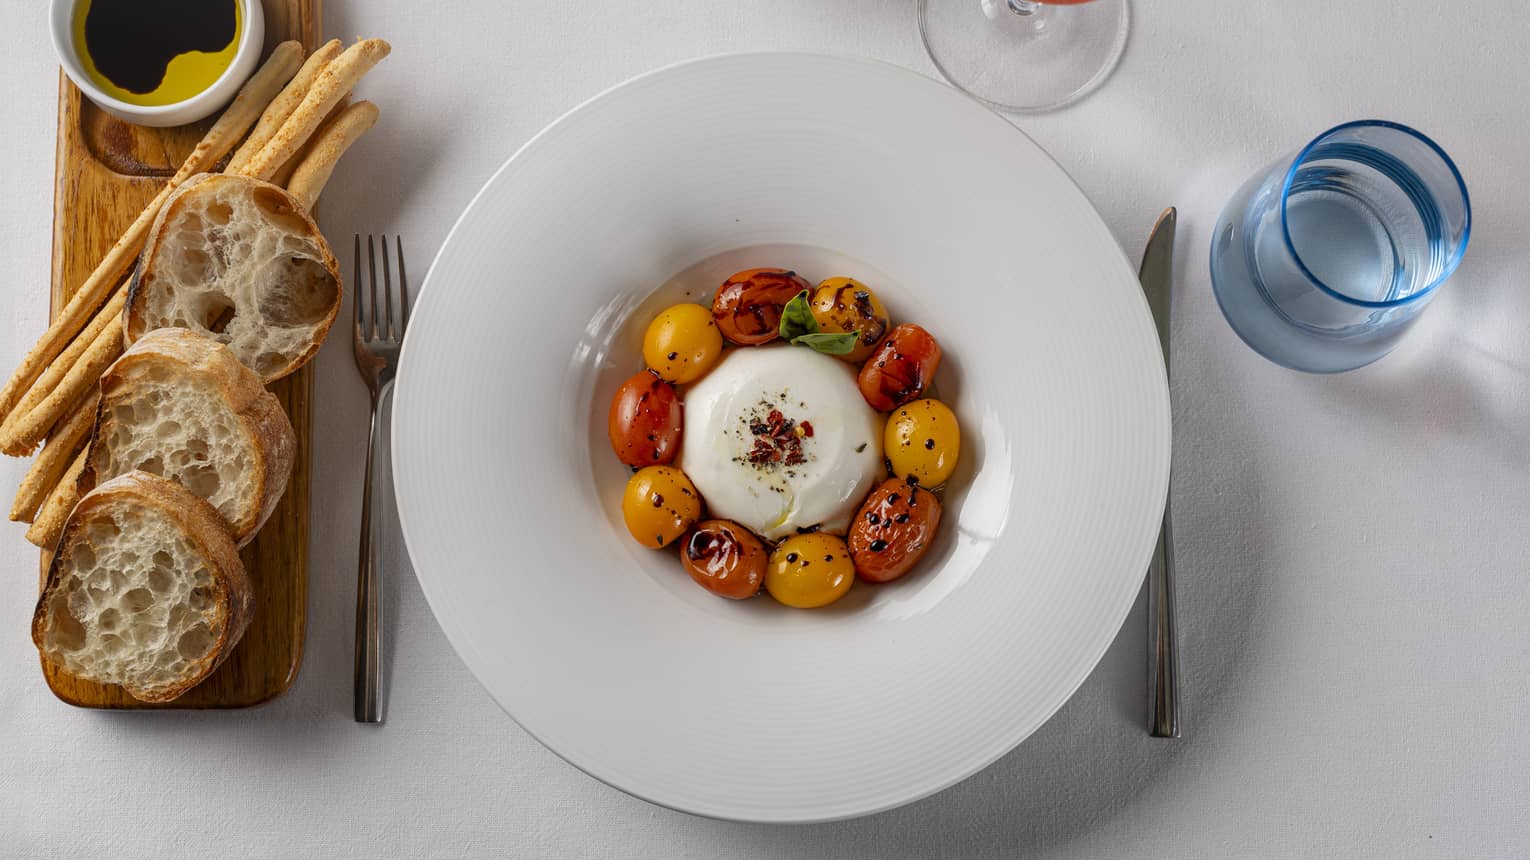 Burrata served with organic cherry tomatoes, fresh basil, extra virgin olive oil and chili flakes plated in a white, wide-rimmed bowl